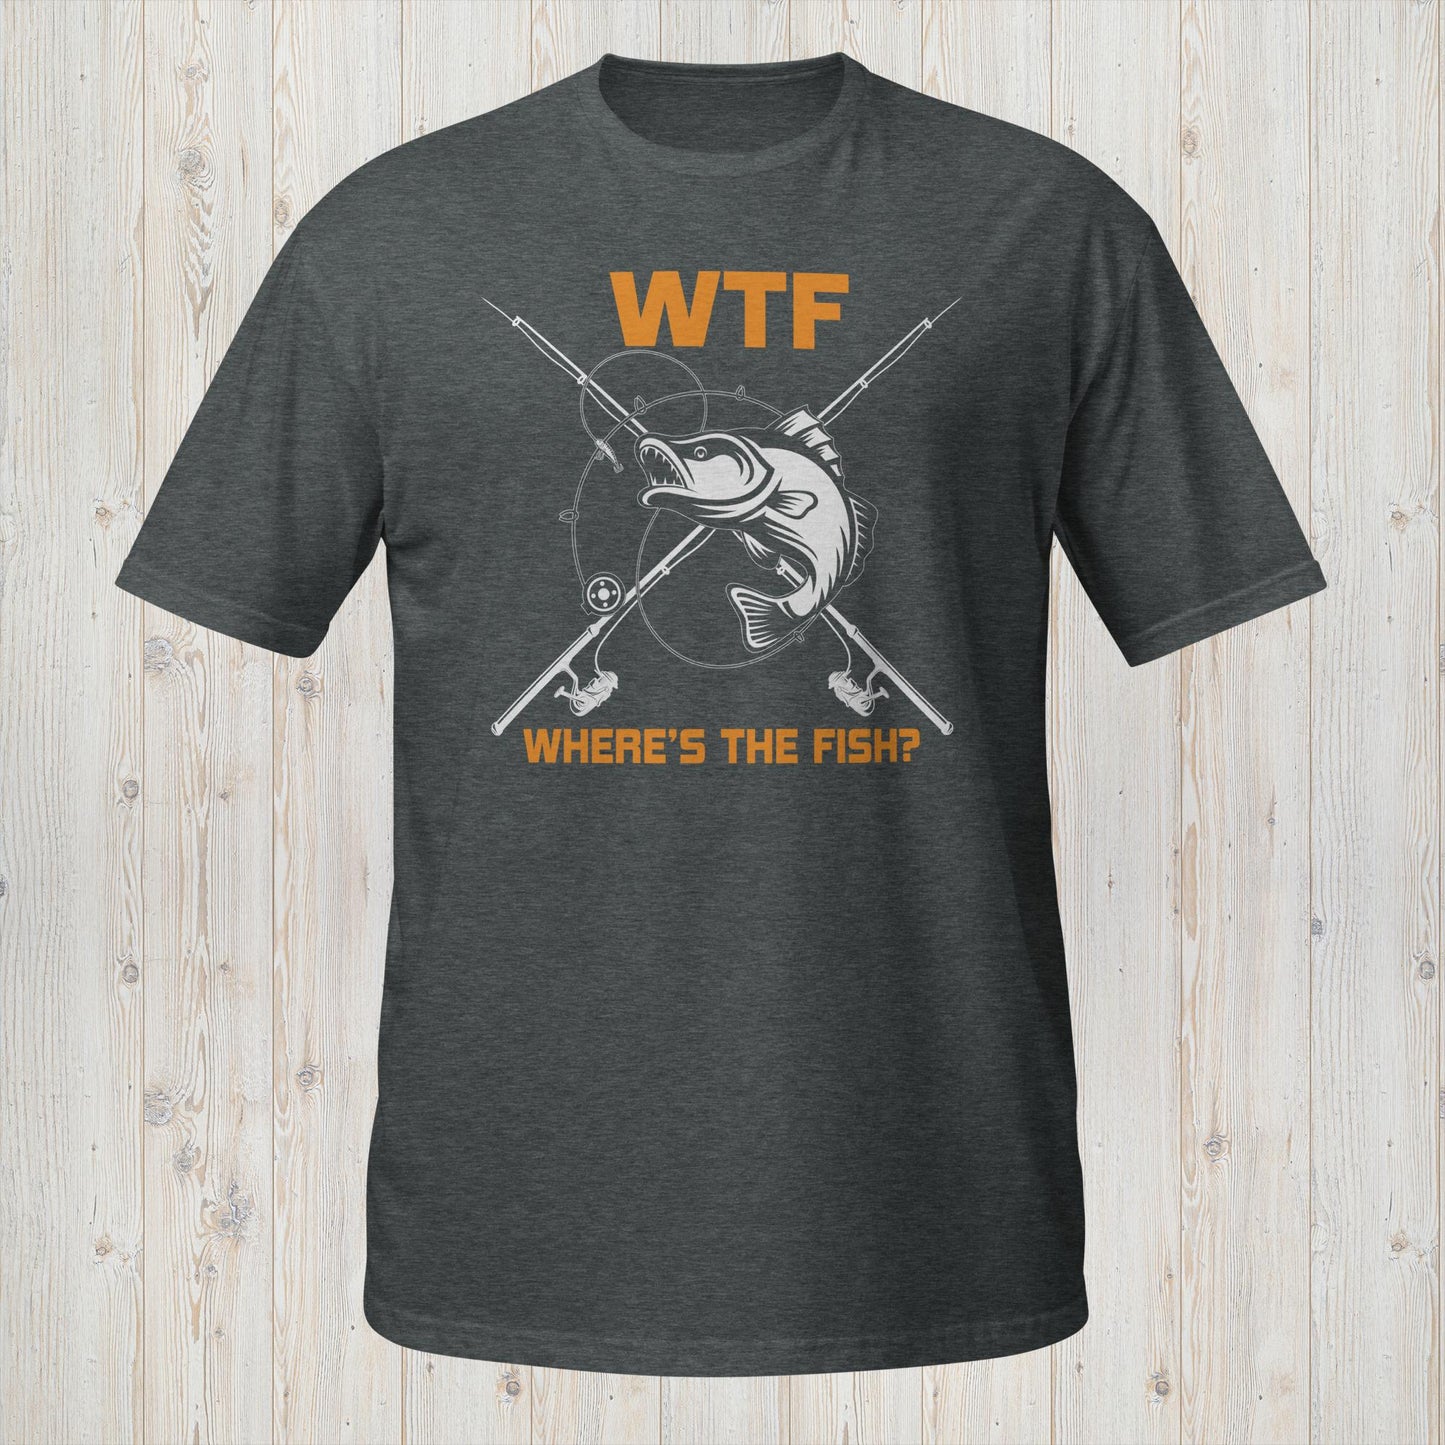 WTF Where's the Fish Tee - Expressive Fishing Quest Statement T-Shirt